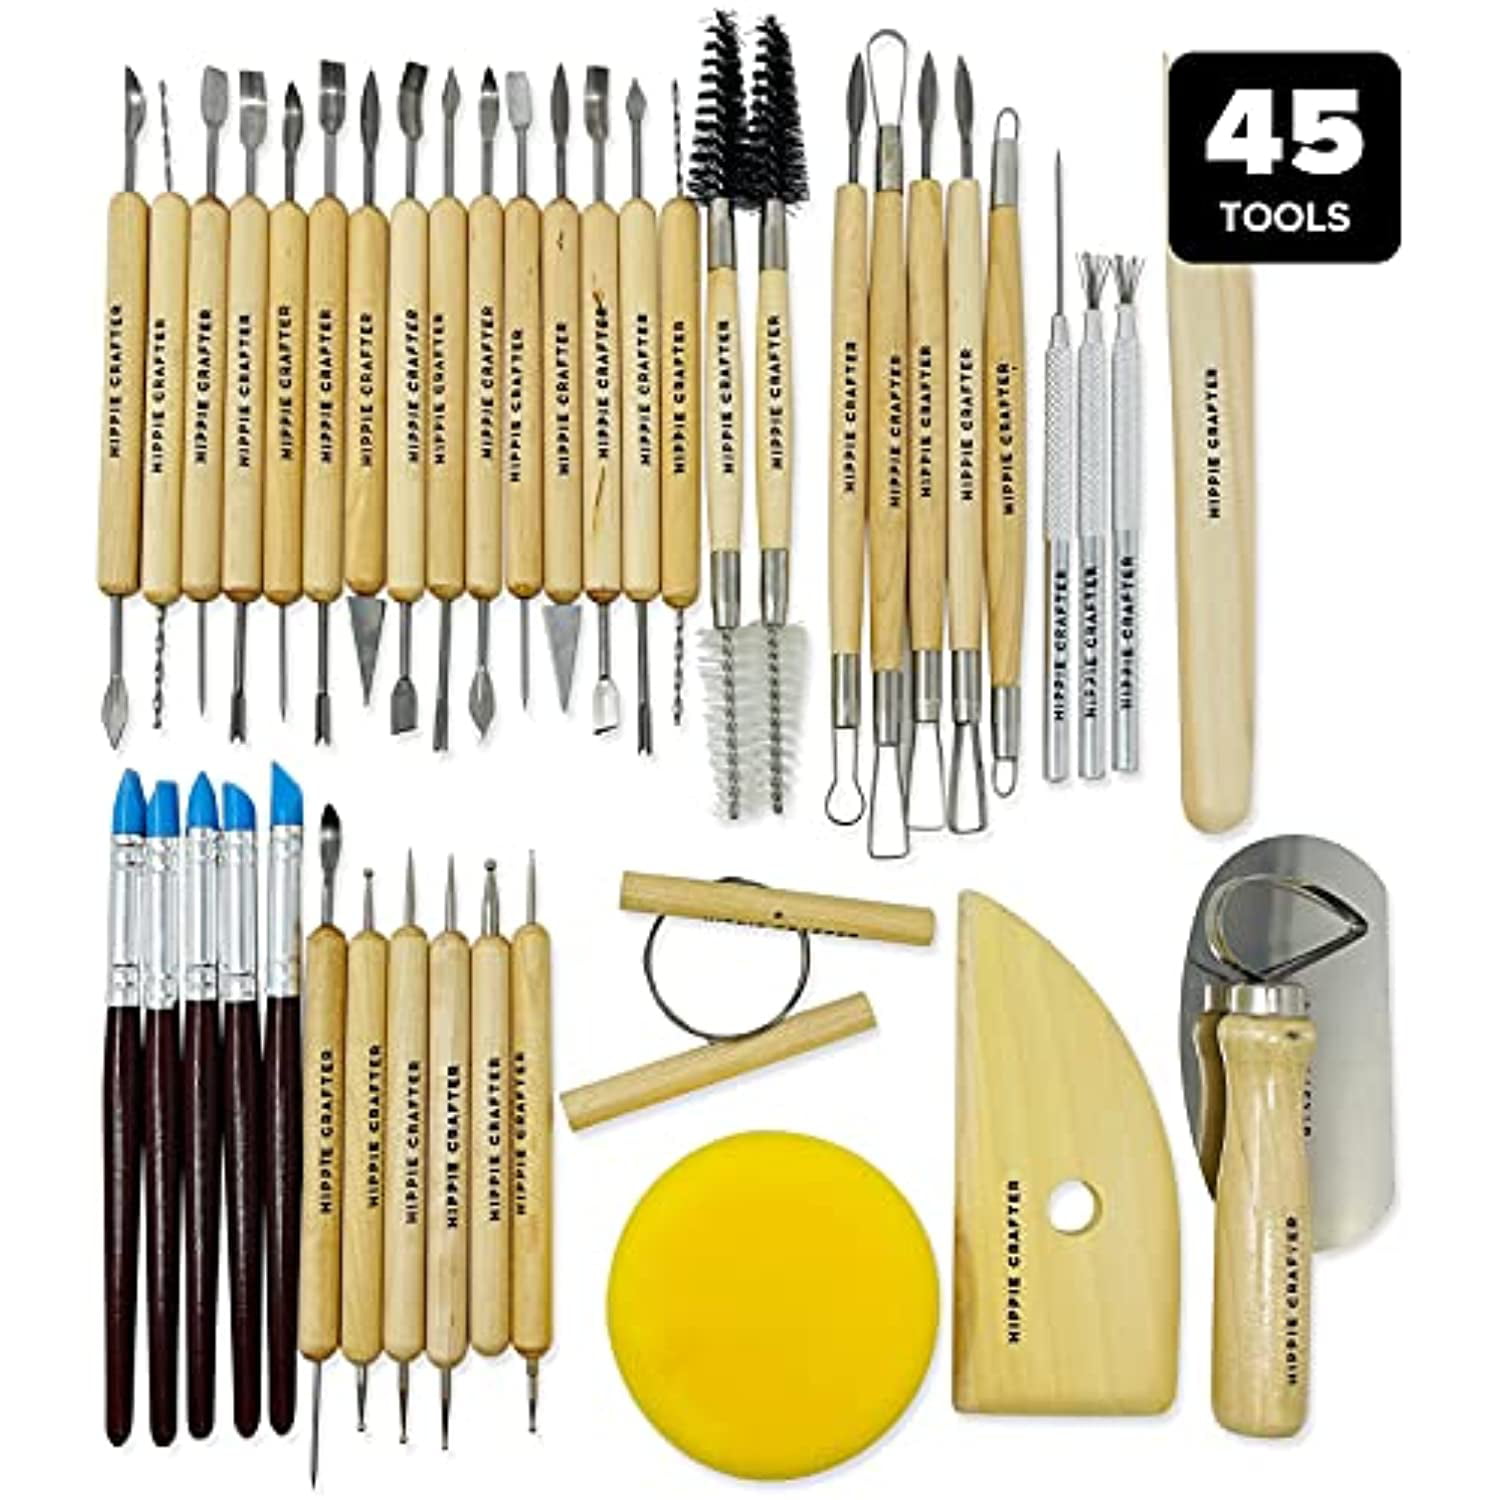 53 Arts 6pcs Set Plastic Crafts Clay Modeling Tool Pottery Carving Tools  Art Clay Price in India - Buy 53 Arts 6pcs Set Plastic Crafts Clay Modeling  Tool Pottery Carving Tools Art